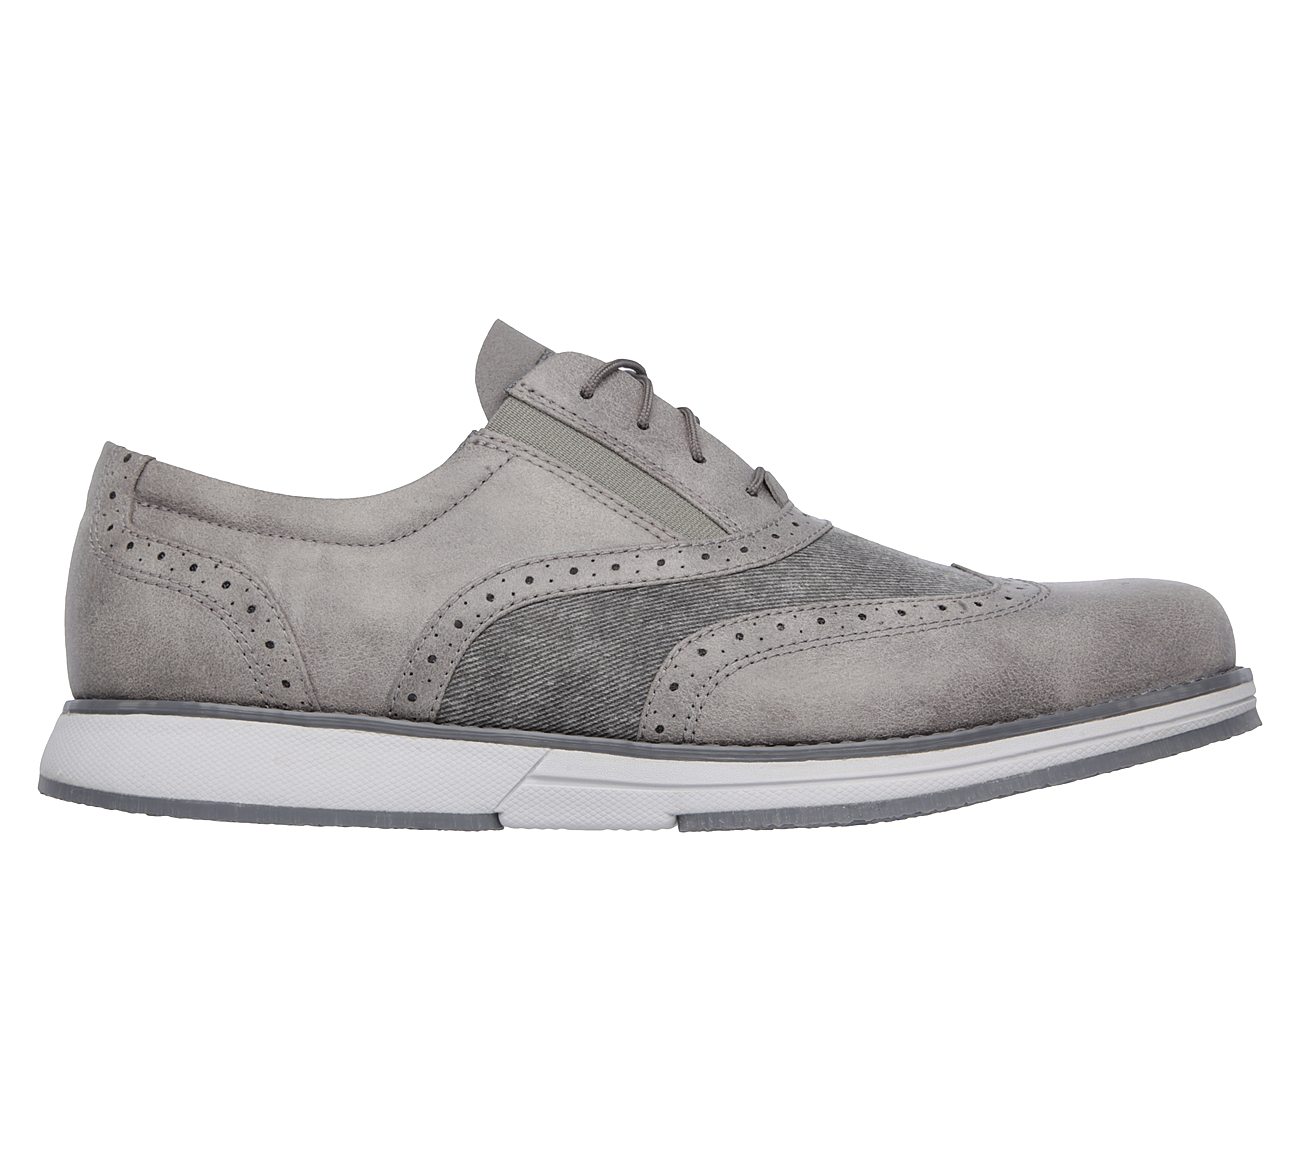 skechers wingtip shoes Cheaper Than 